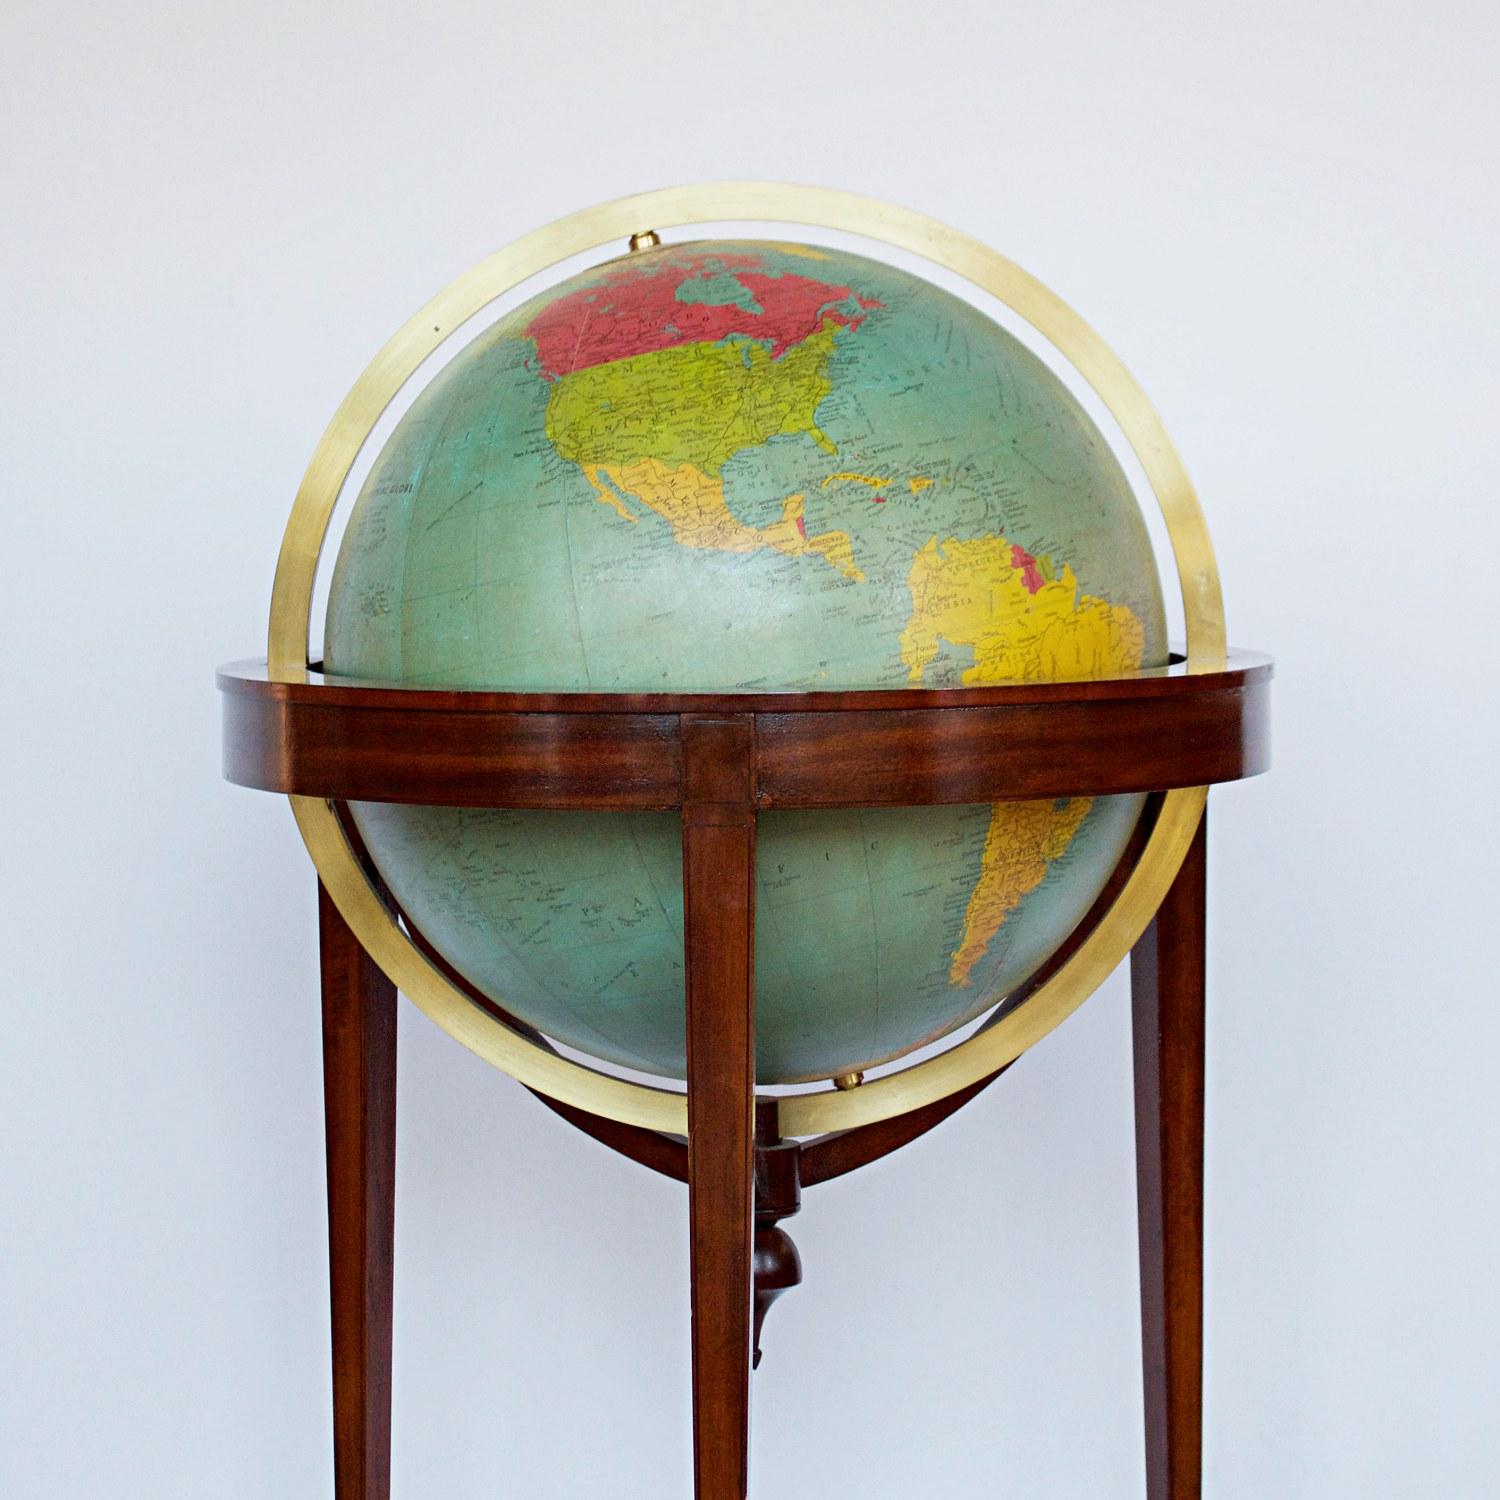 A late 18th century style terrestrial globe printed and manufactured by George Philip & Son Ltd. mahogany and walnut stand, with a paper glass covered compass underneath.

Dimensions: H 106 cm, D 60 cm

Origin: English

Date: circa